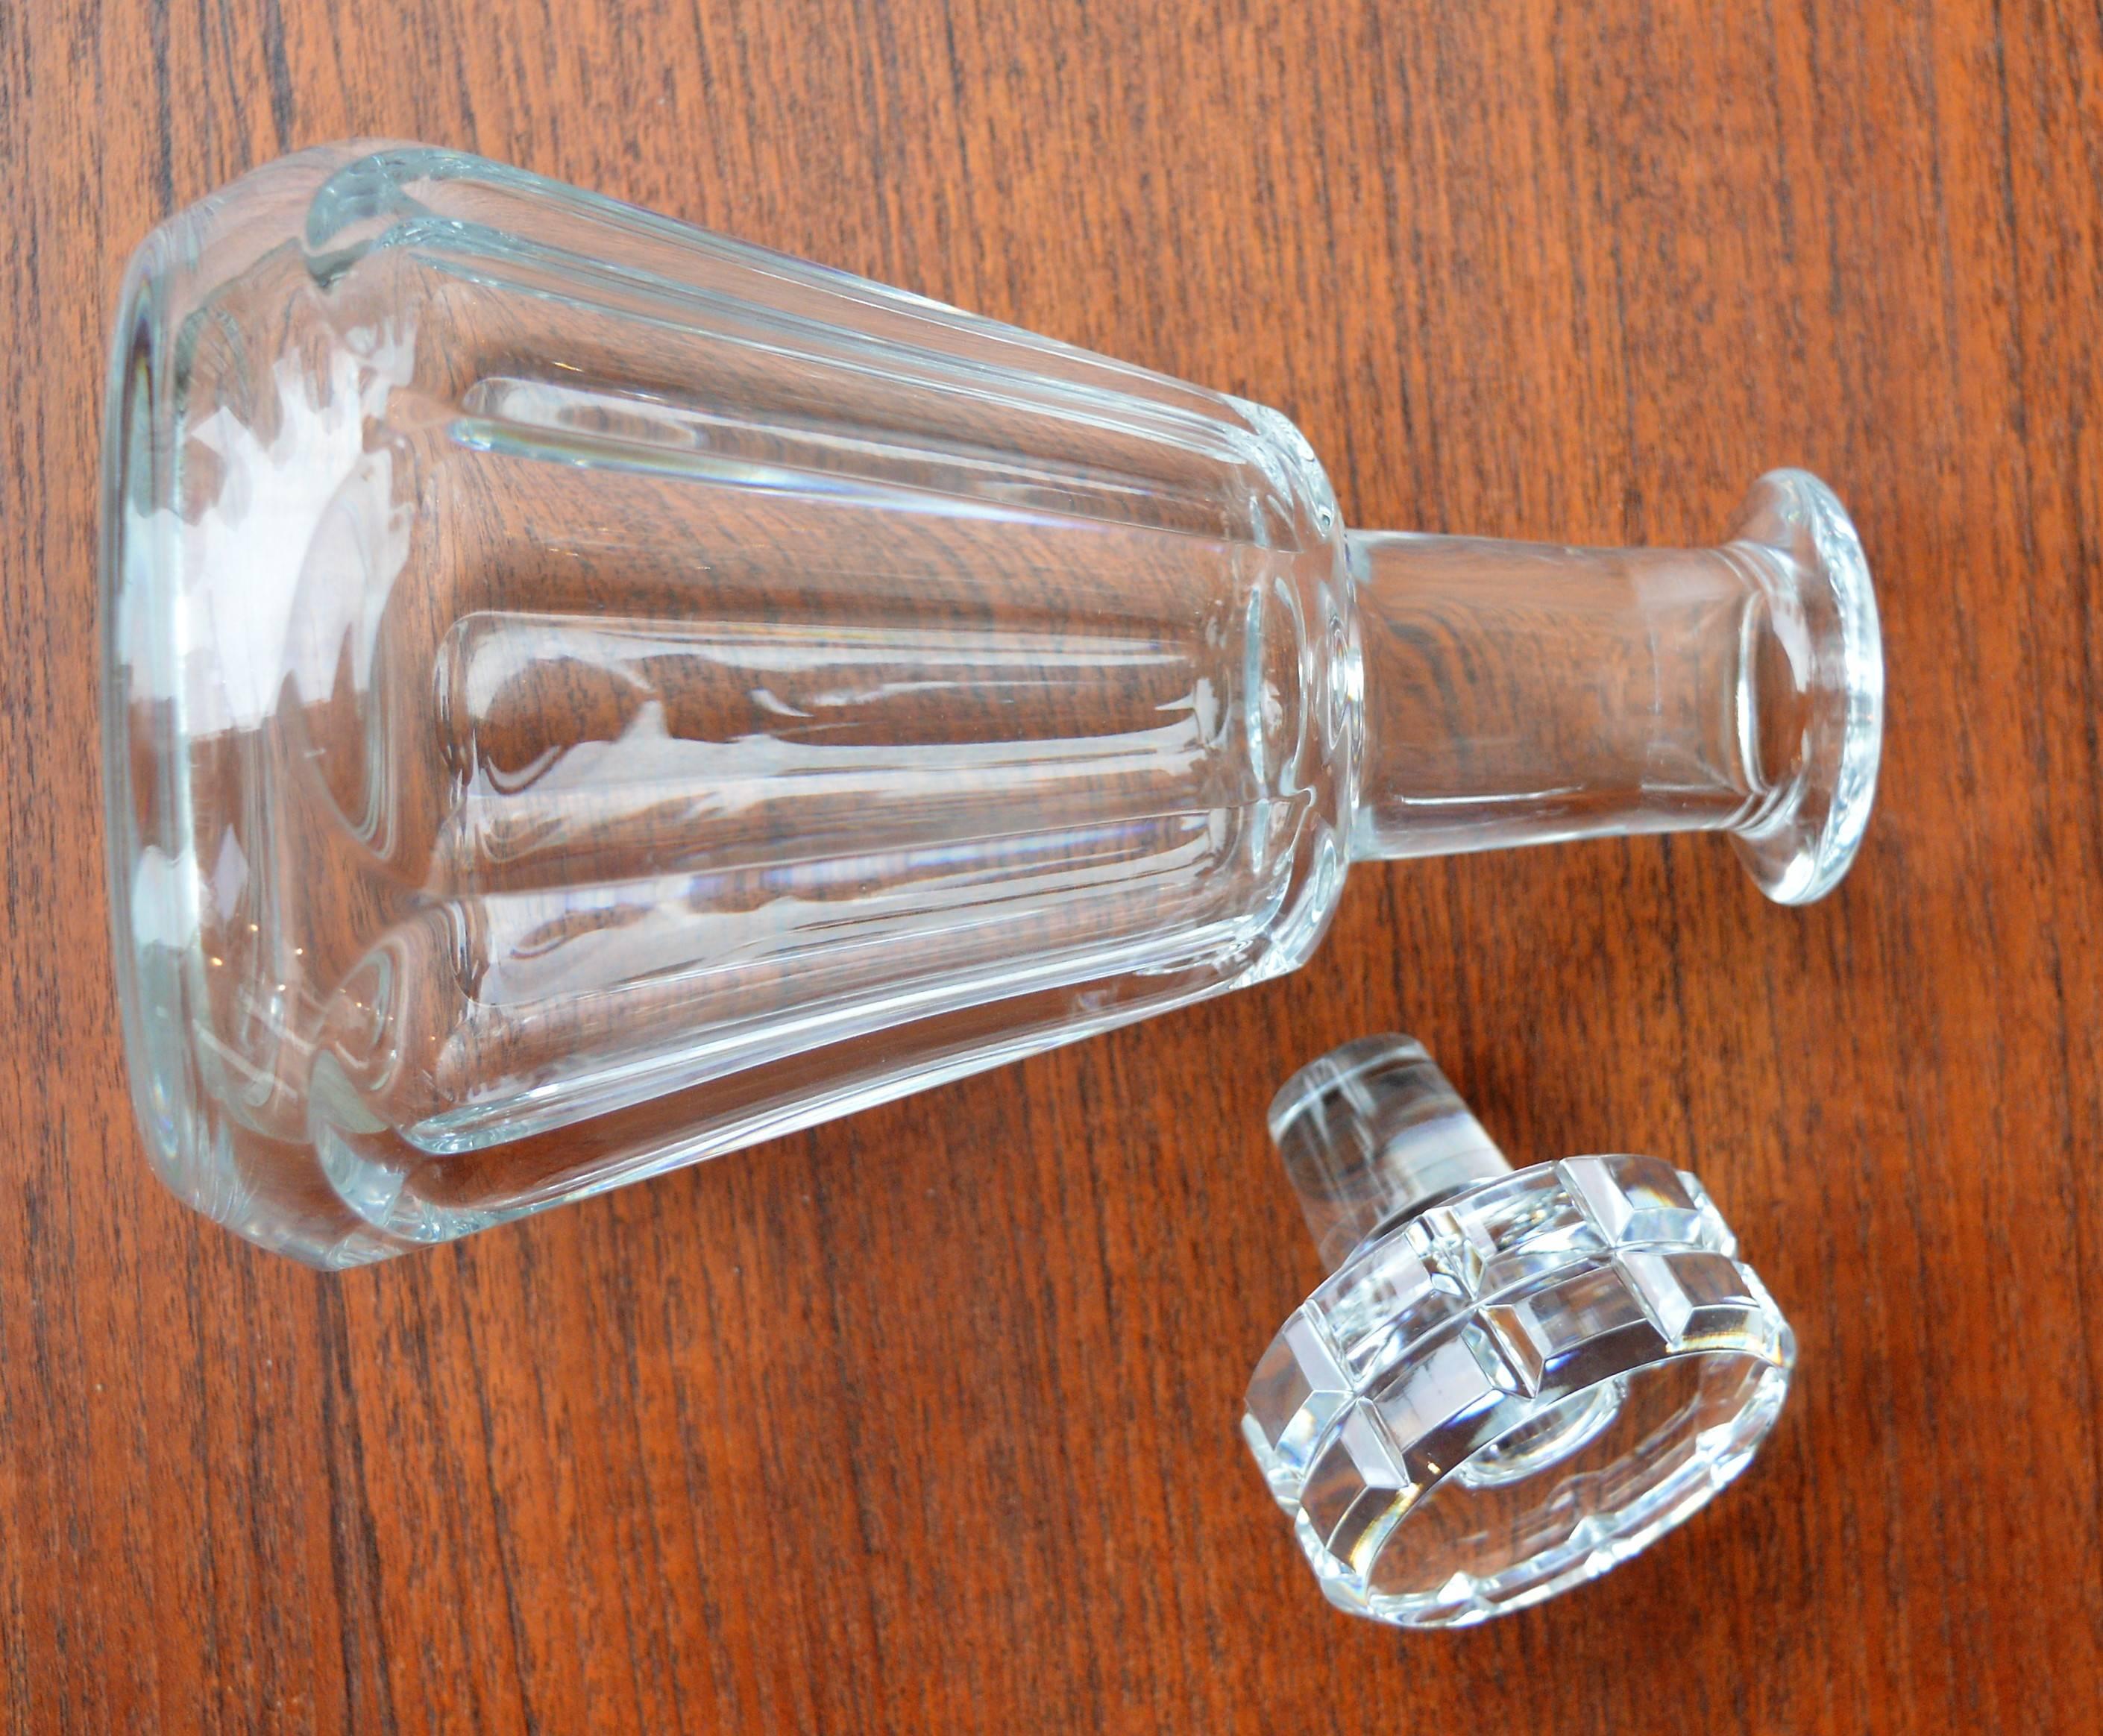 Baccarat France Cut Crystal Decanter with Stopper, 1960s For Sale 3